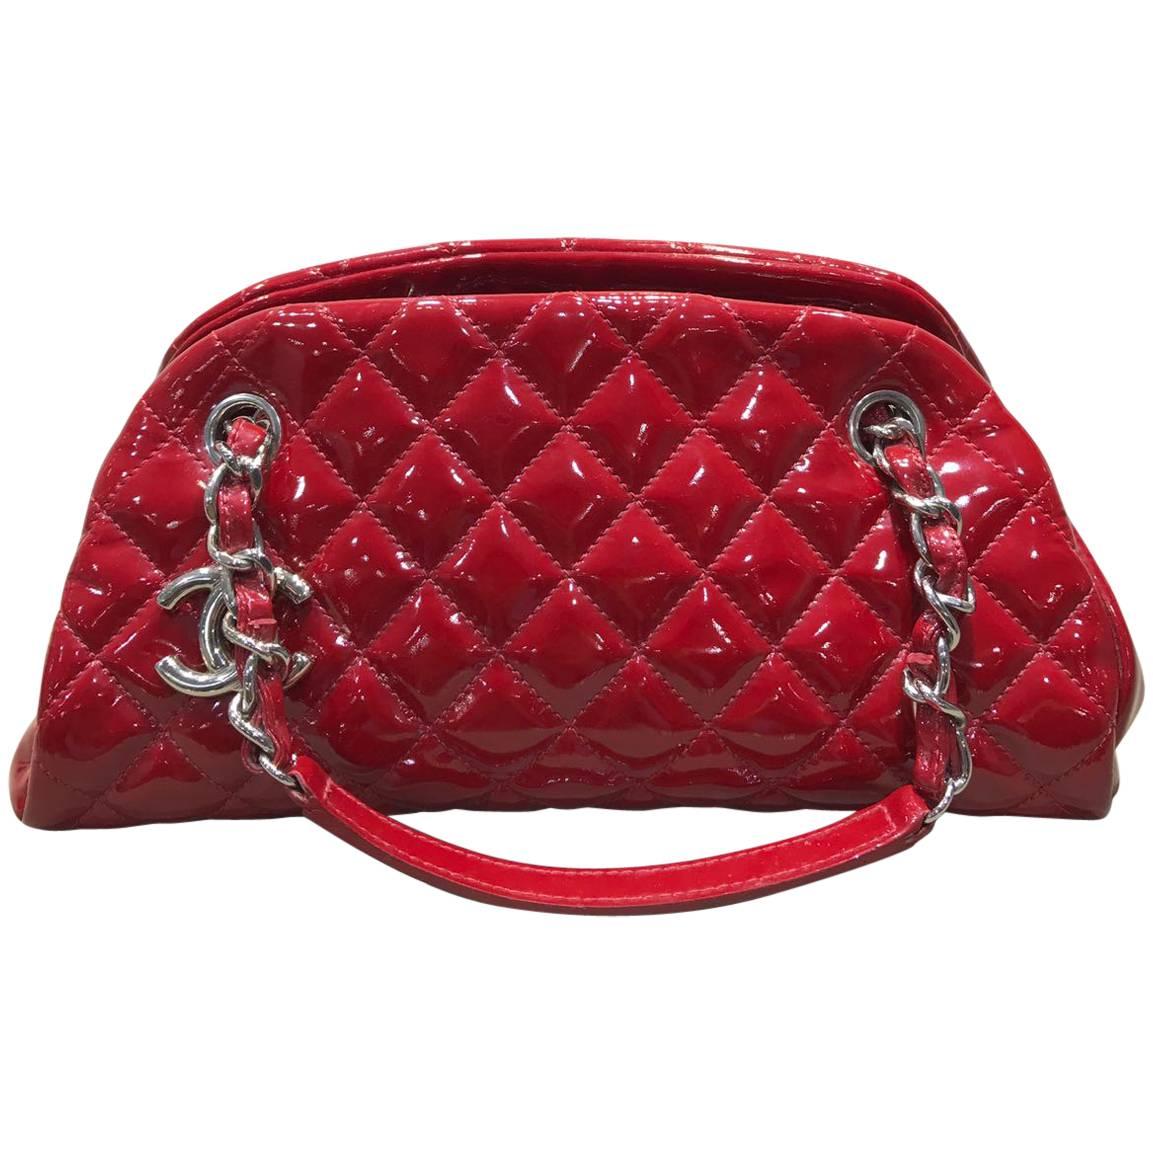 Chanel Red Quilted Patent Leather Mademoiselle Bowling Bag